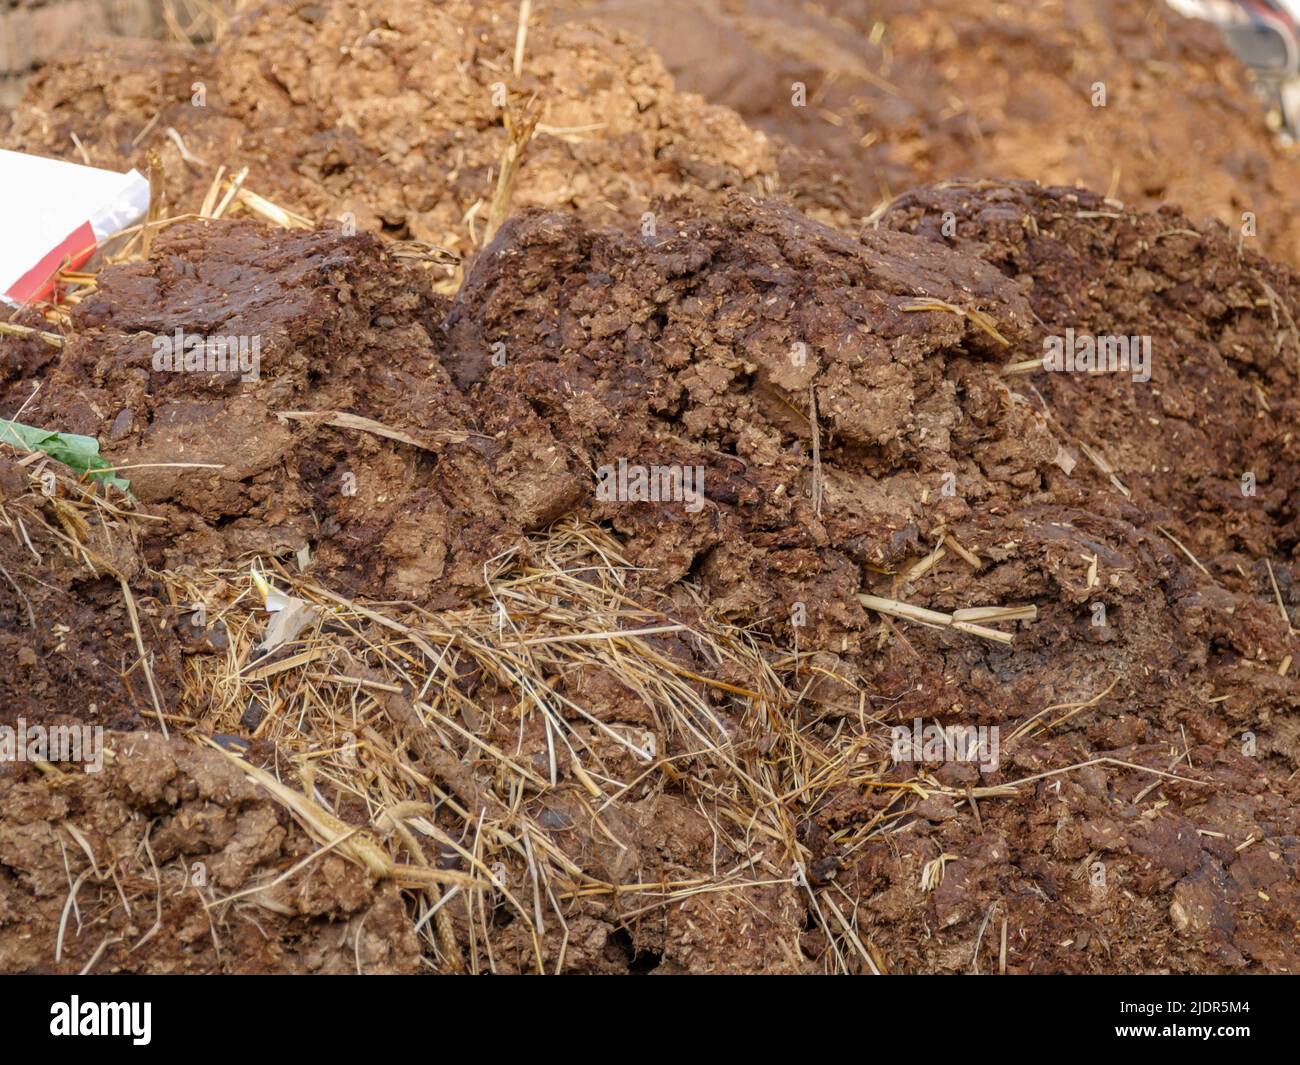 Cow dung gathered in indian village rural areas as bio fertilizer Stock Photo